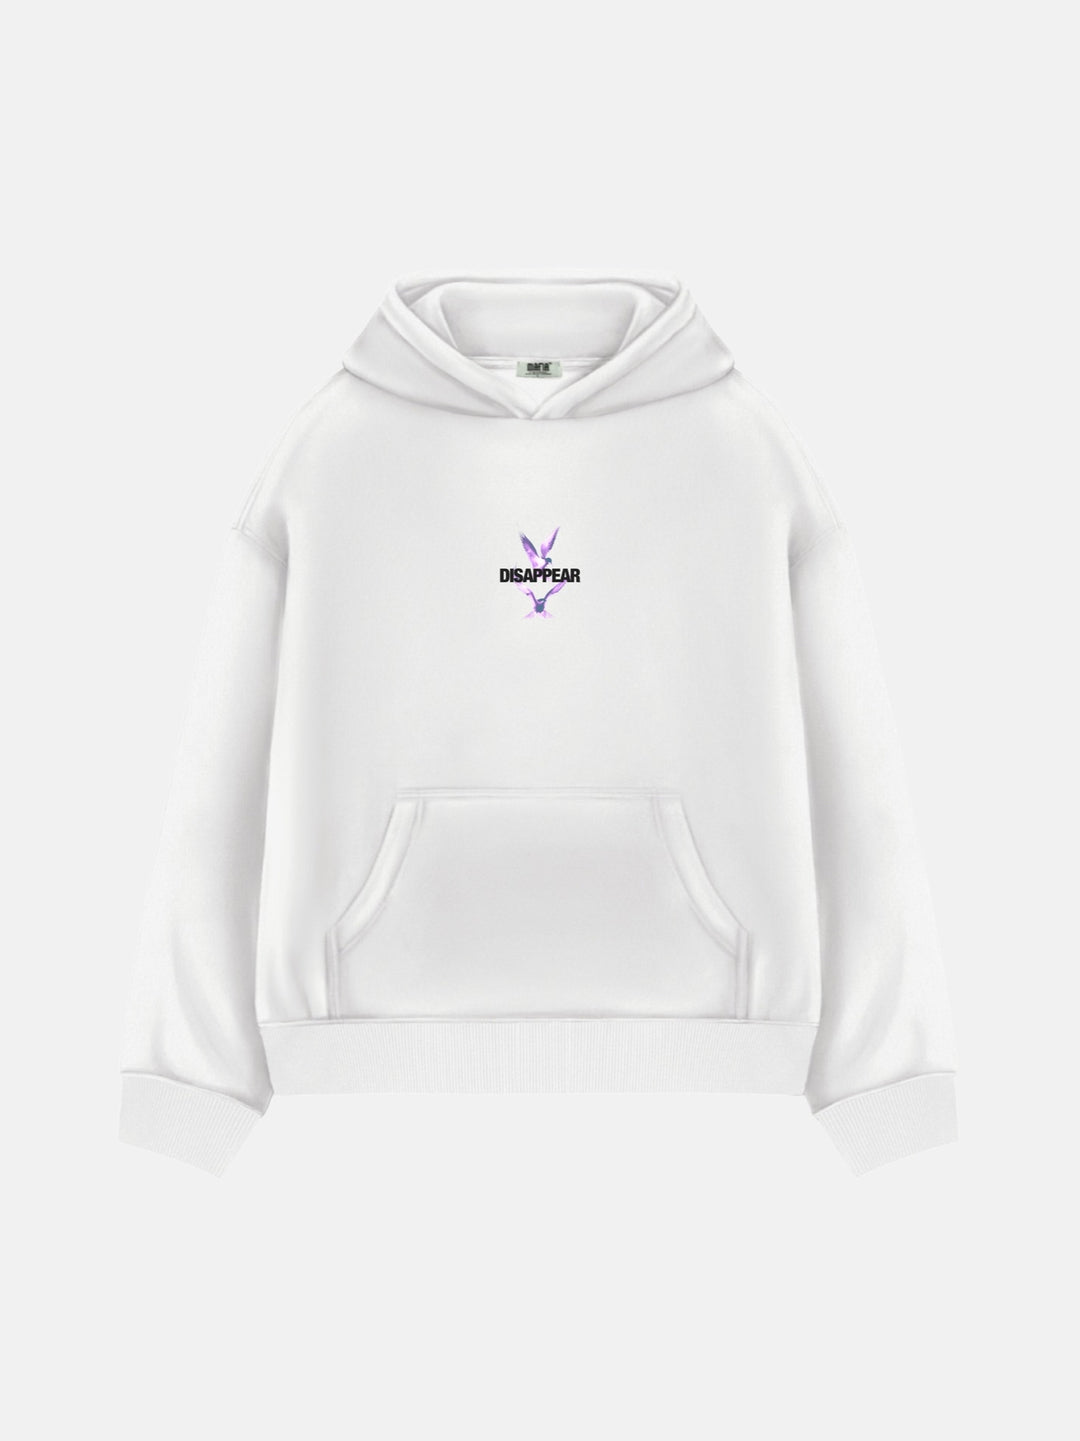 Oversize Disappear Hoodie - White